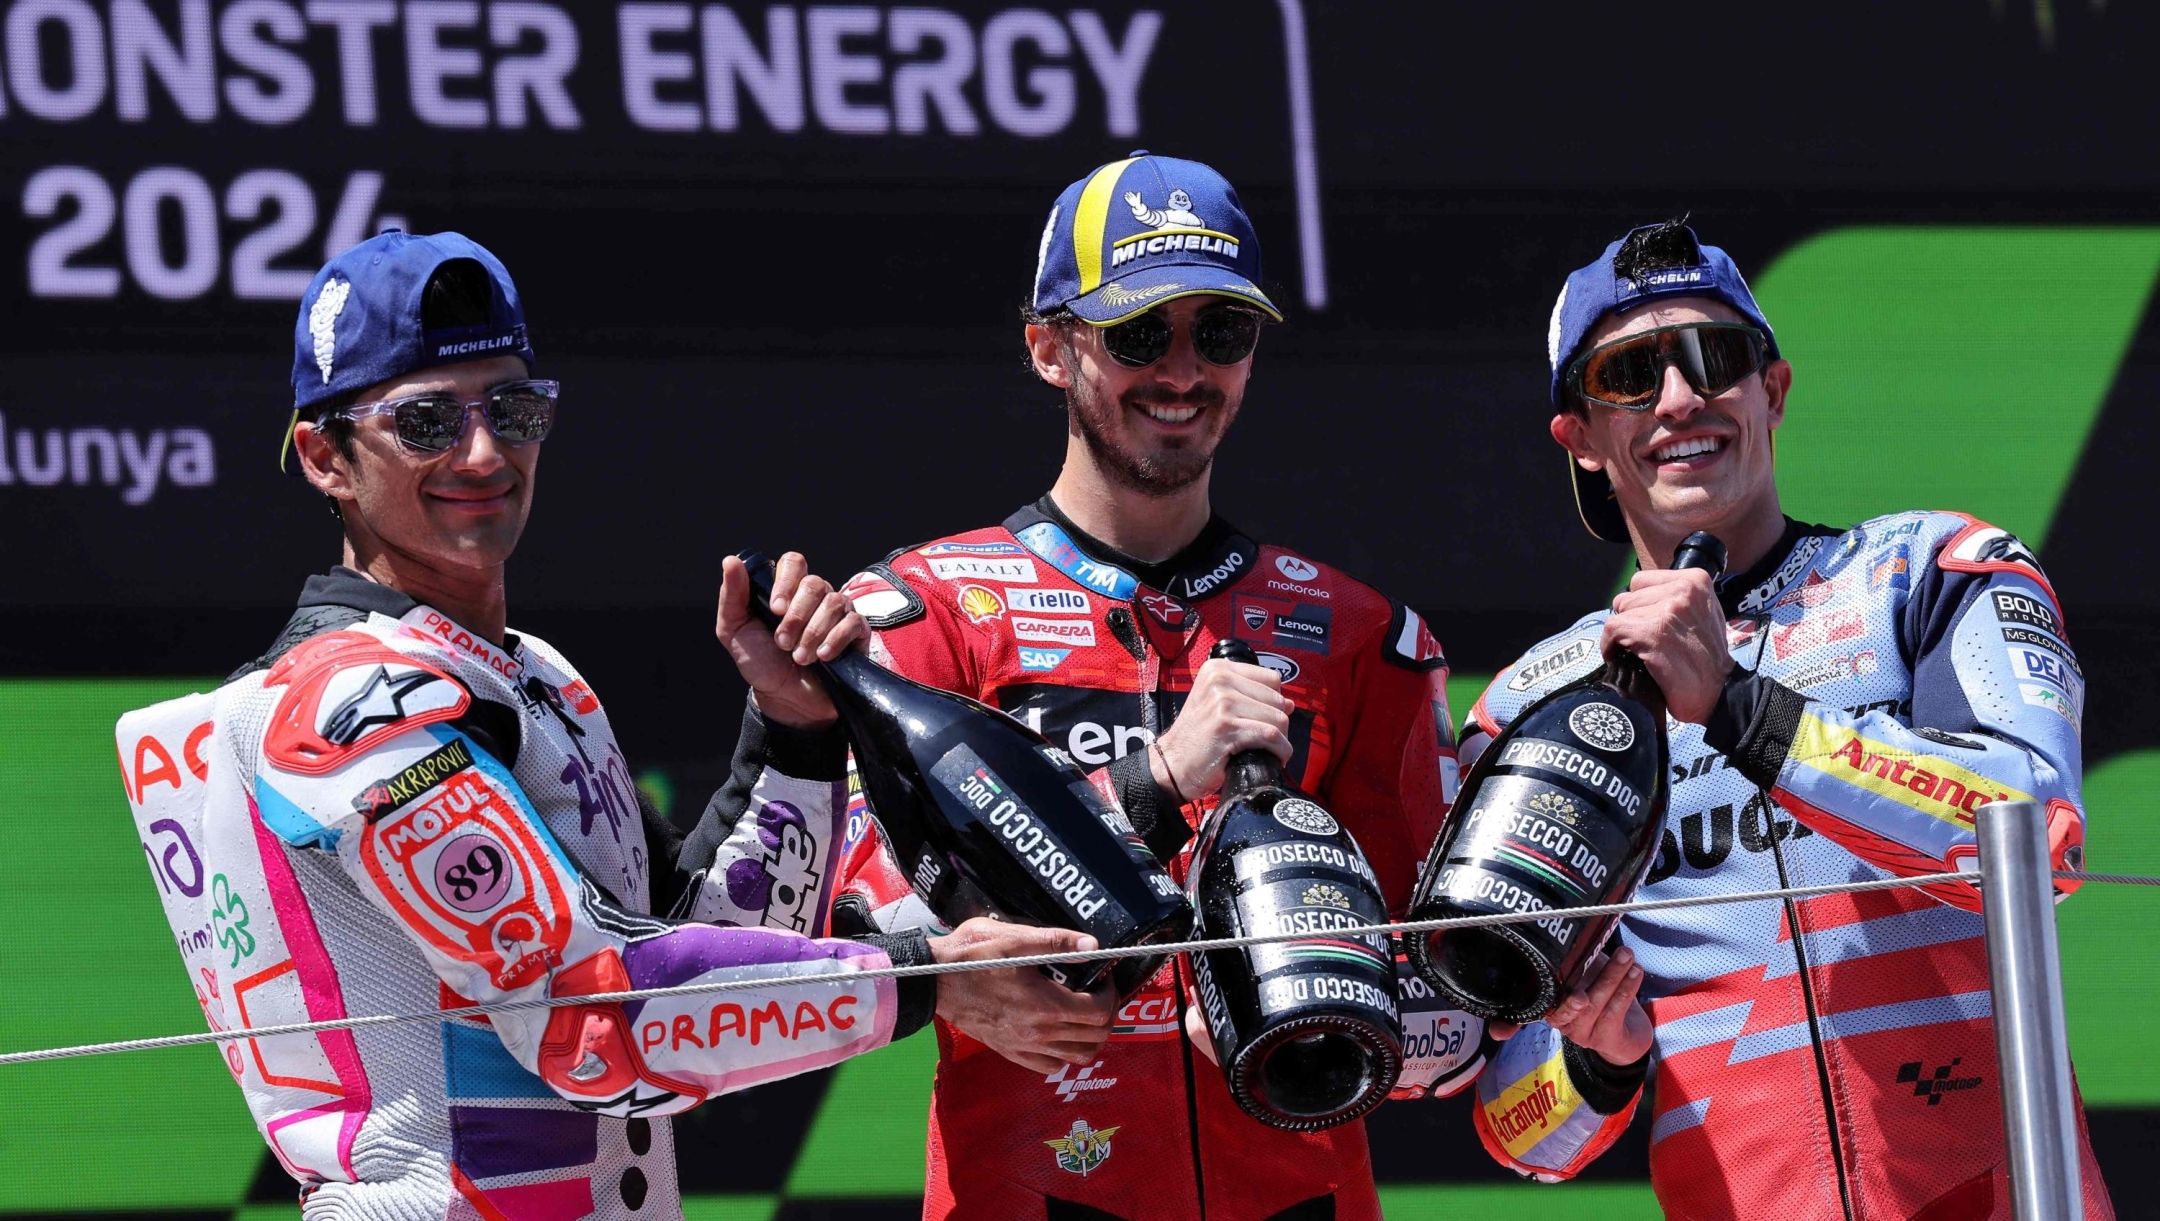 (From L) Second-placed Ducati Spanish rider Jorge Martin, winner Ducati Italian rider Francesco Bagnaia and third-placed Ducati Spanish rider Marc Marquez celebrate on the podium after the MotoGP Race of the Moto Grand Prix of Catalonia at the Circuit de Catalunya on May 26, 2024 in Montmelo on the outskirts of Barcelona. (Photo by LLUIS GENE / AFP)